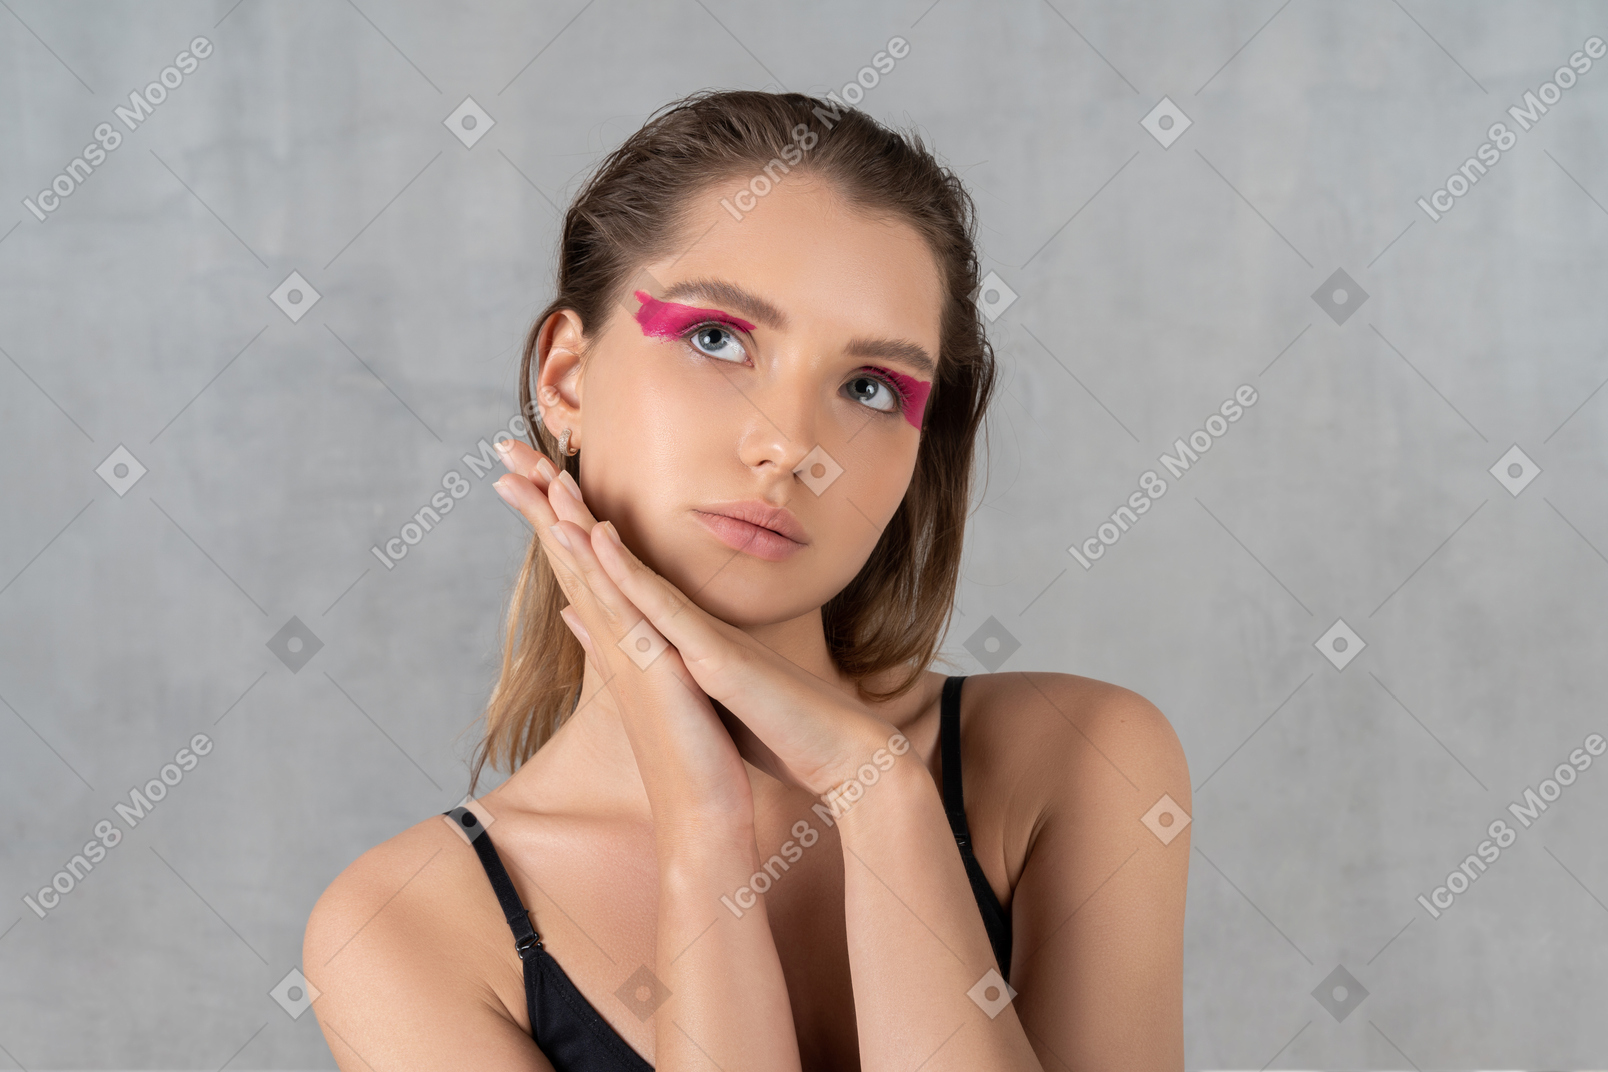 Portrait of a young woman with bright pink eye make-up daydreaming